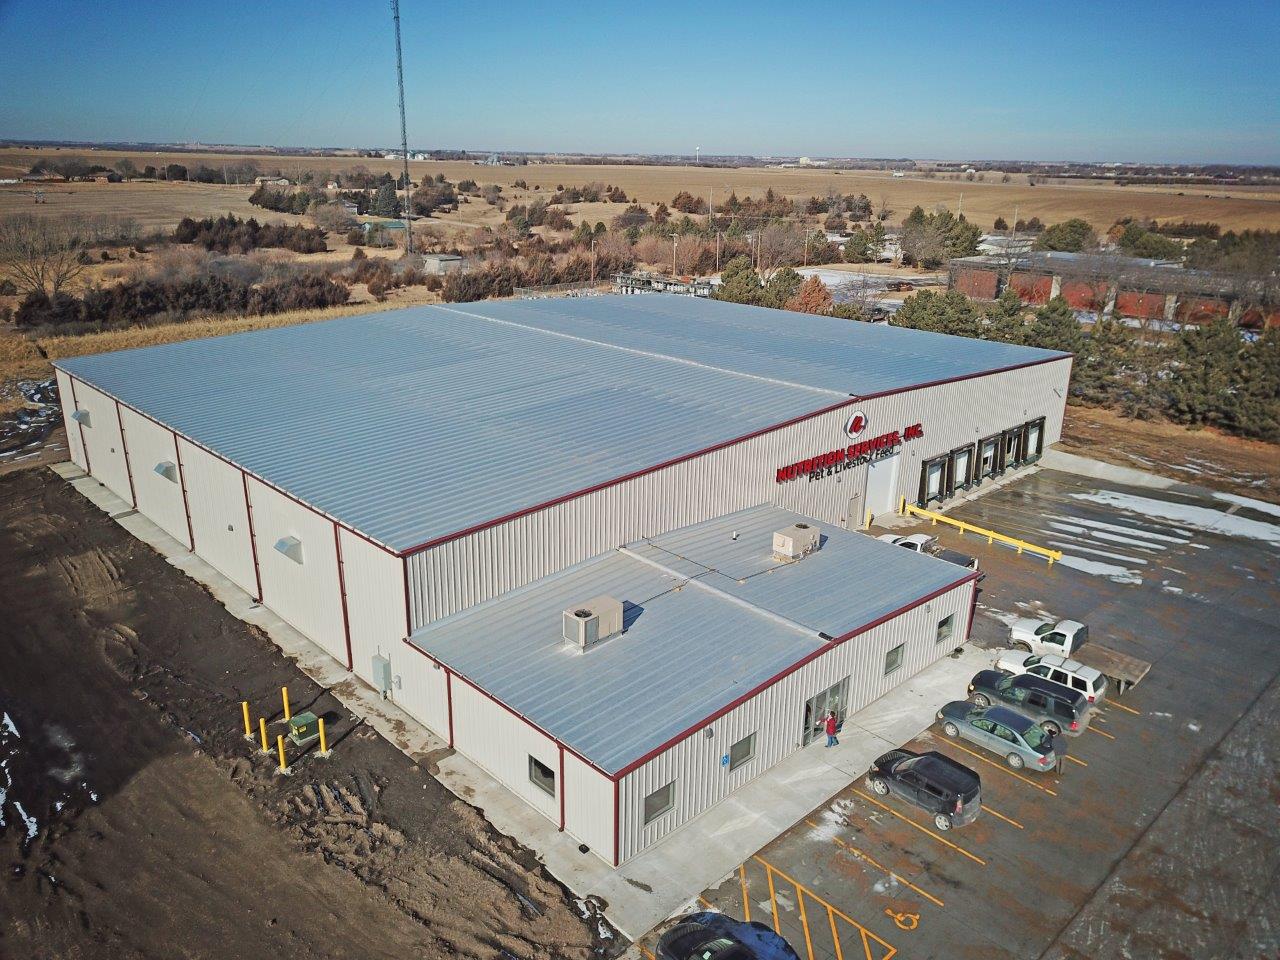 Nutrition Services Warehouse built in 2018